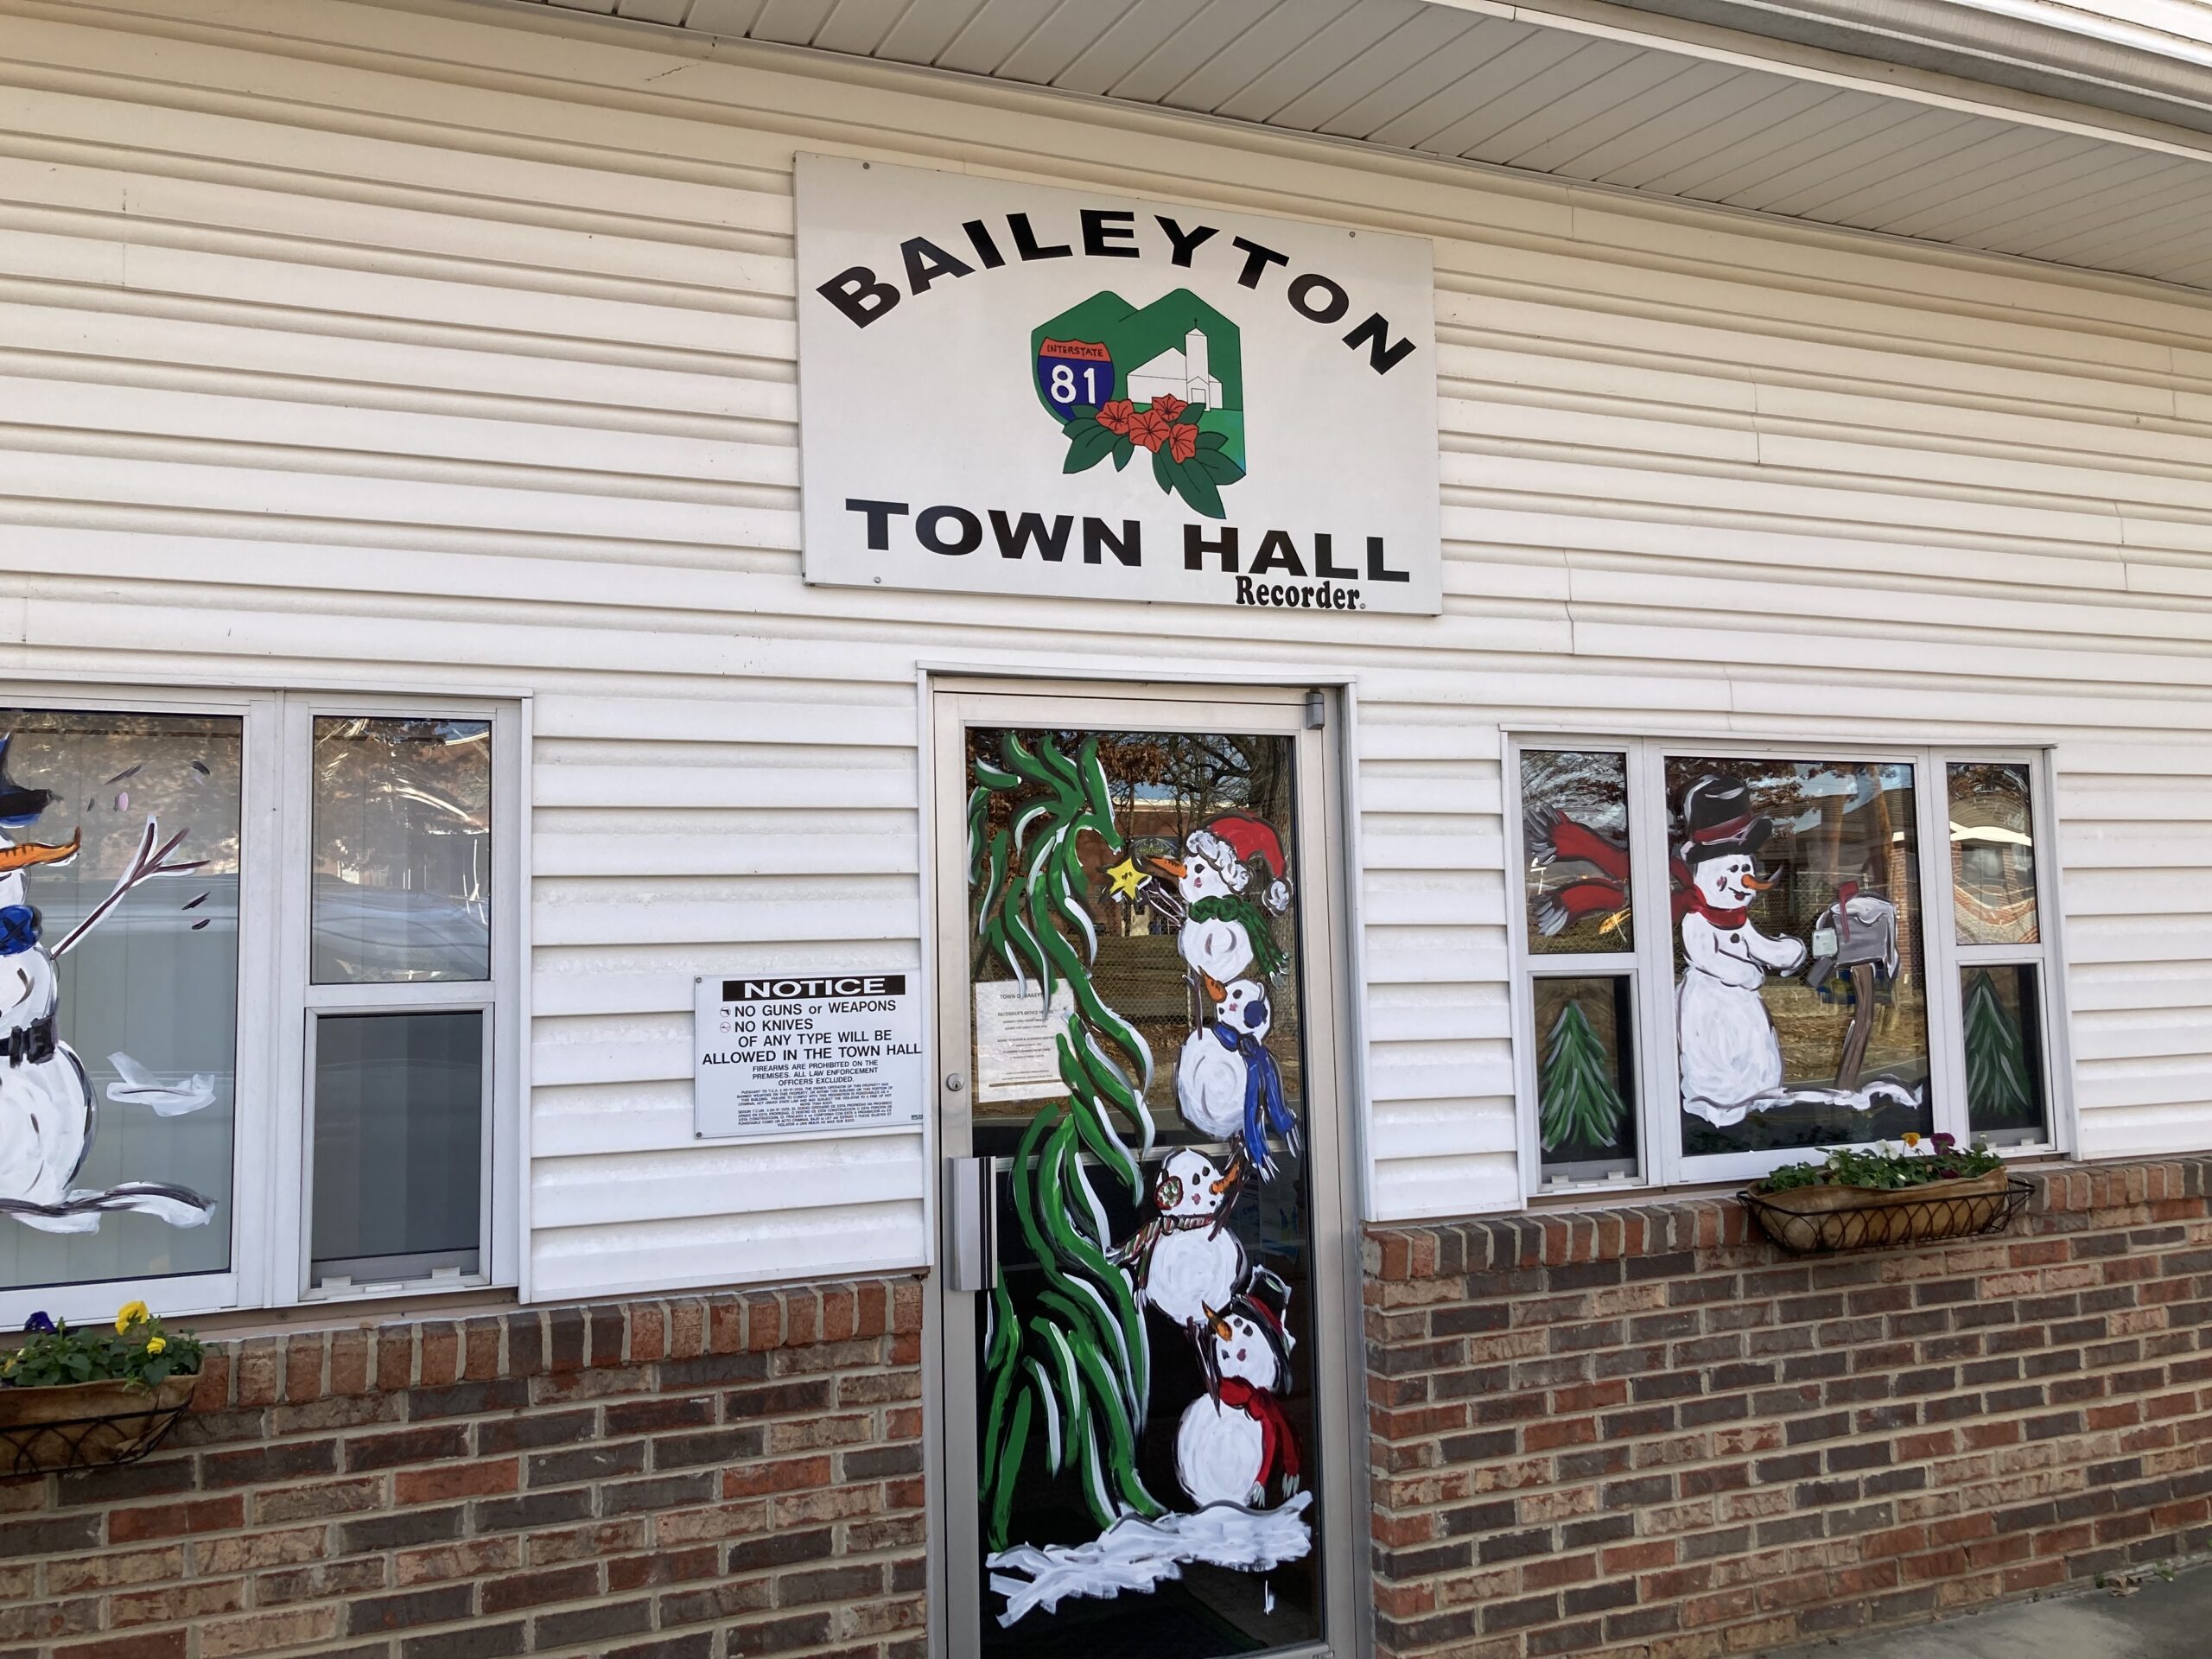 Baileyton Planning Commission Meeting Canceled